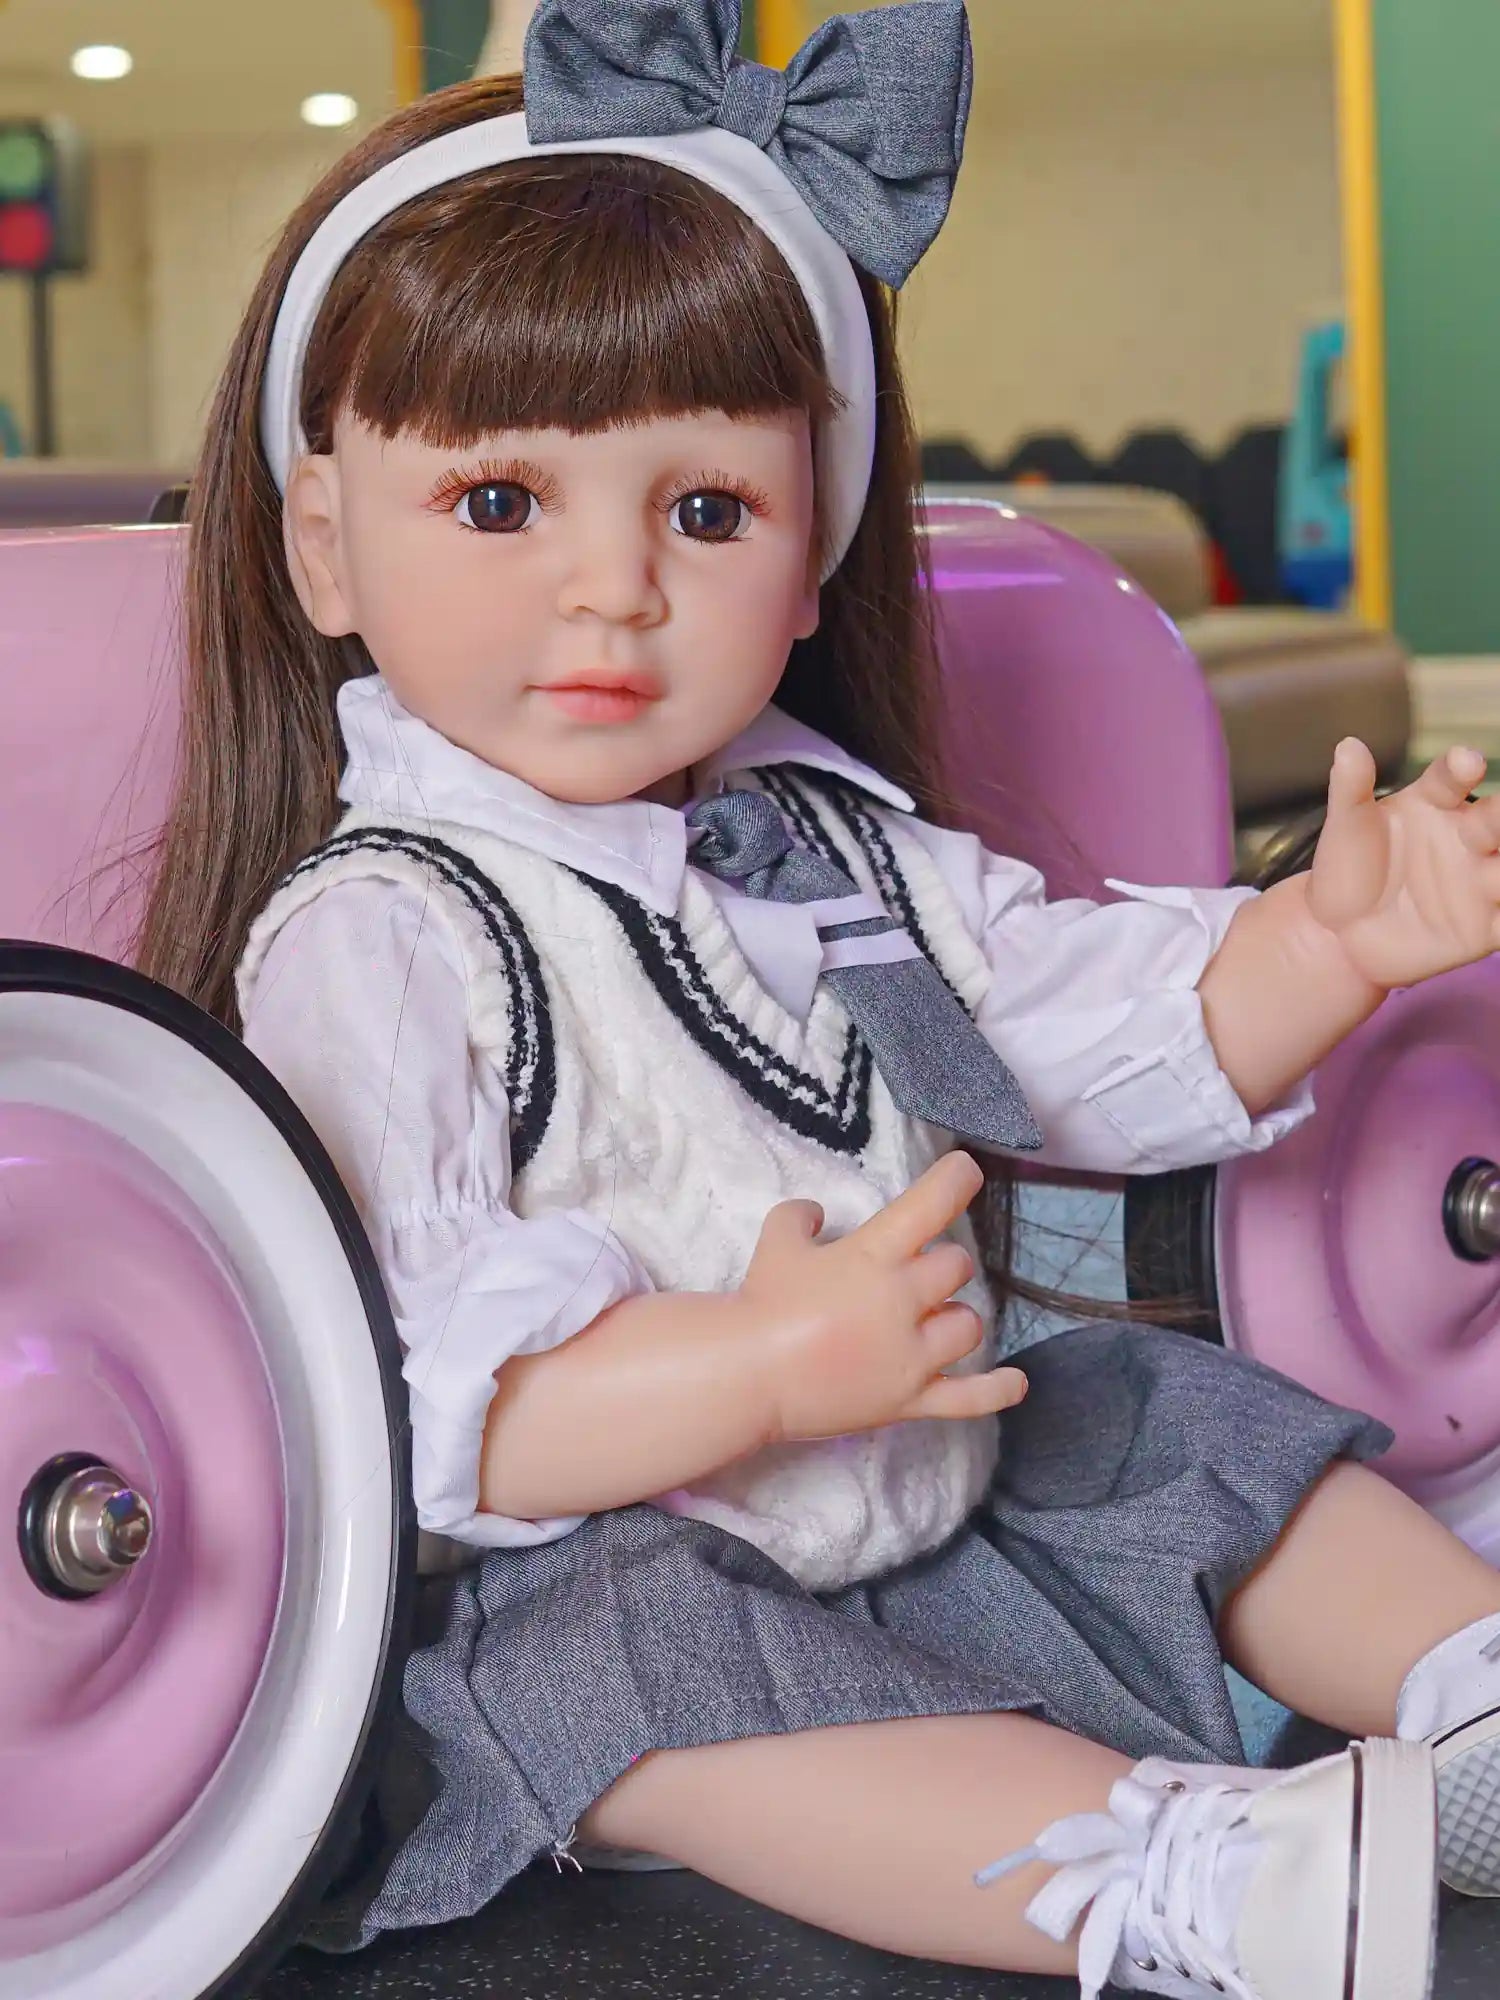 A doll with the likeness of a child at school, complete with brown hair and pensive brown eyes, dressed in a grey and white outfit and sitting by a pink toy car.